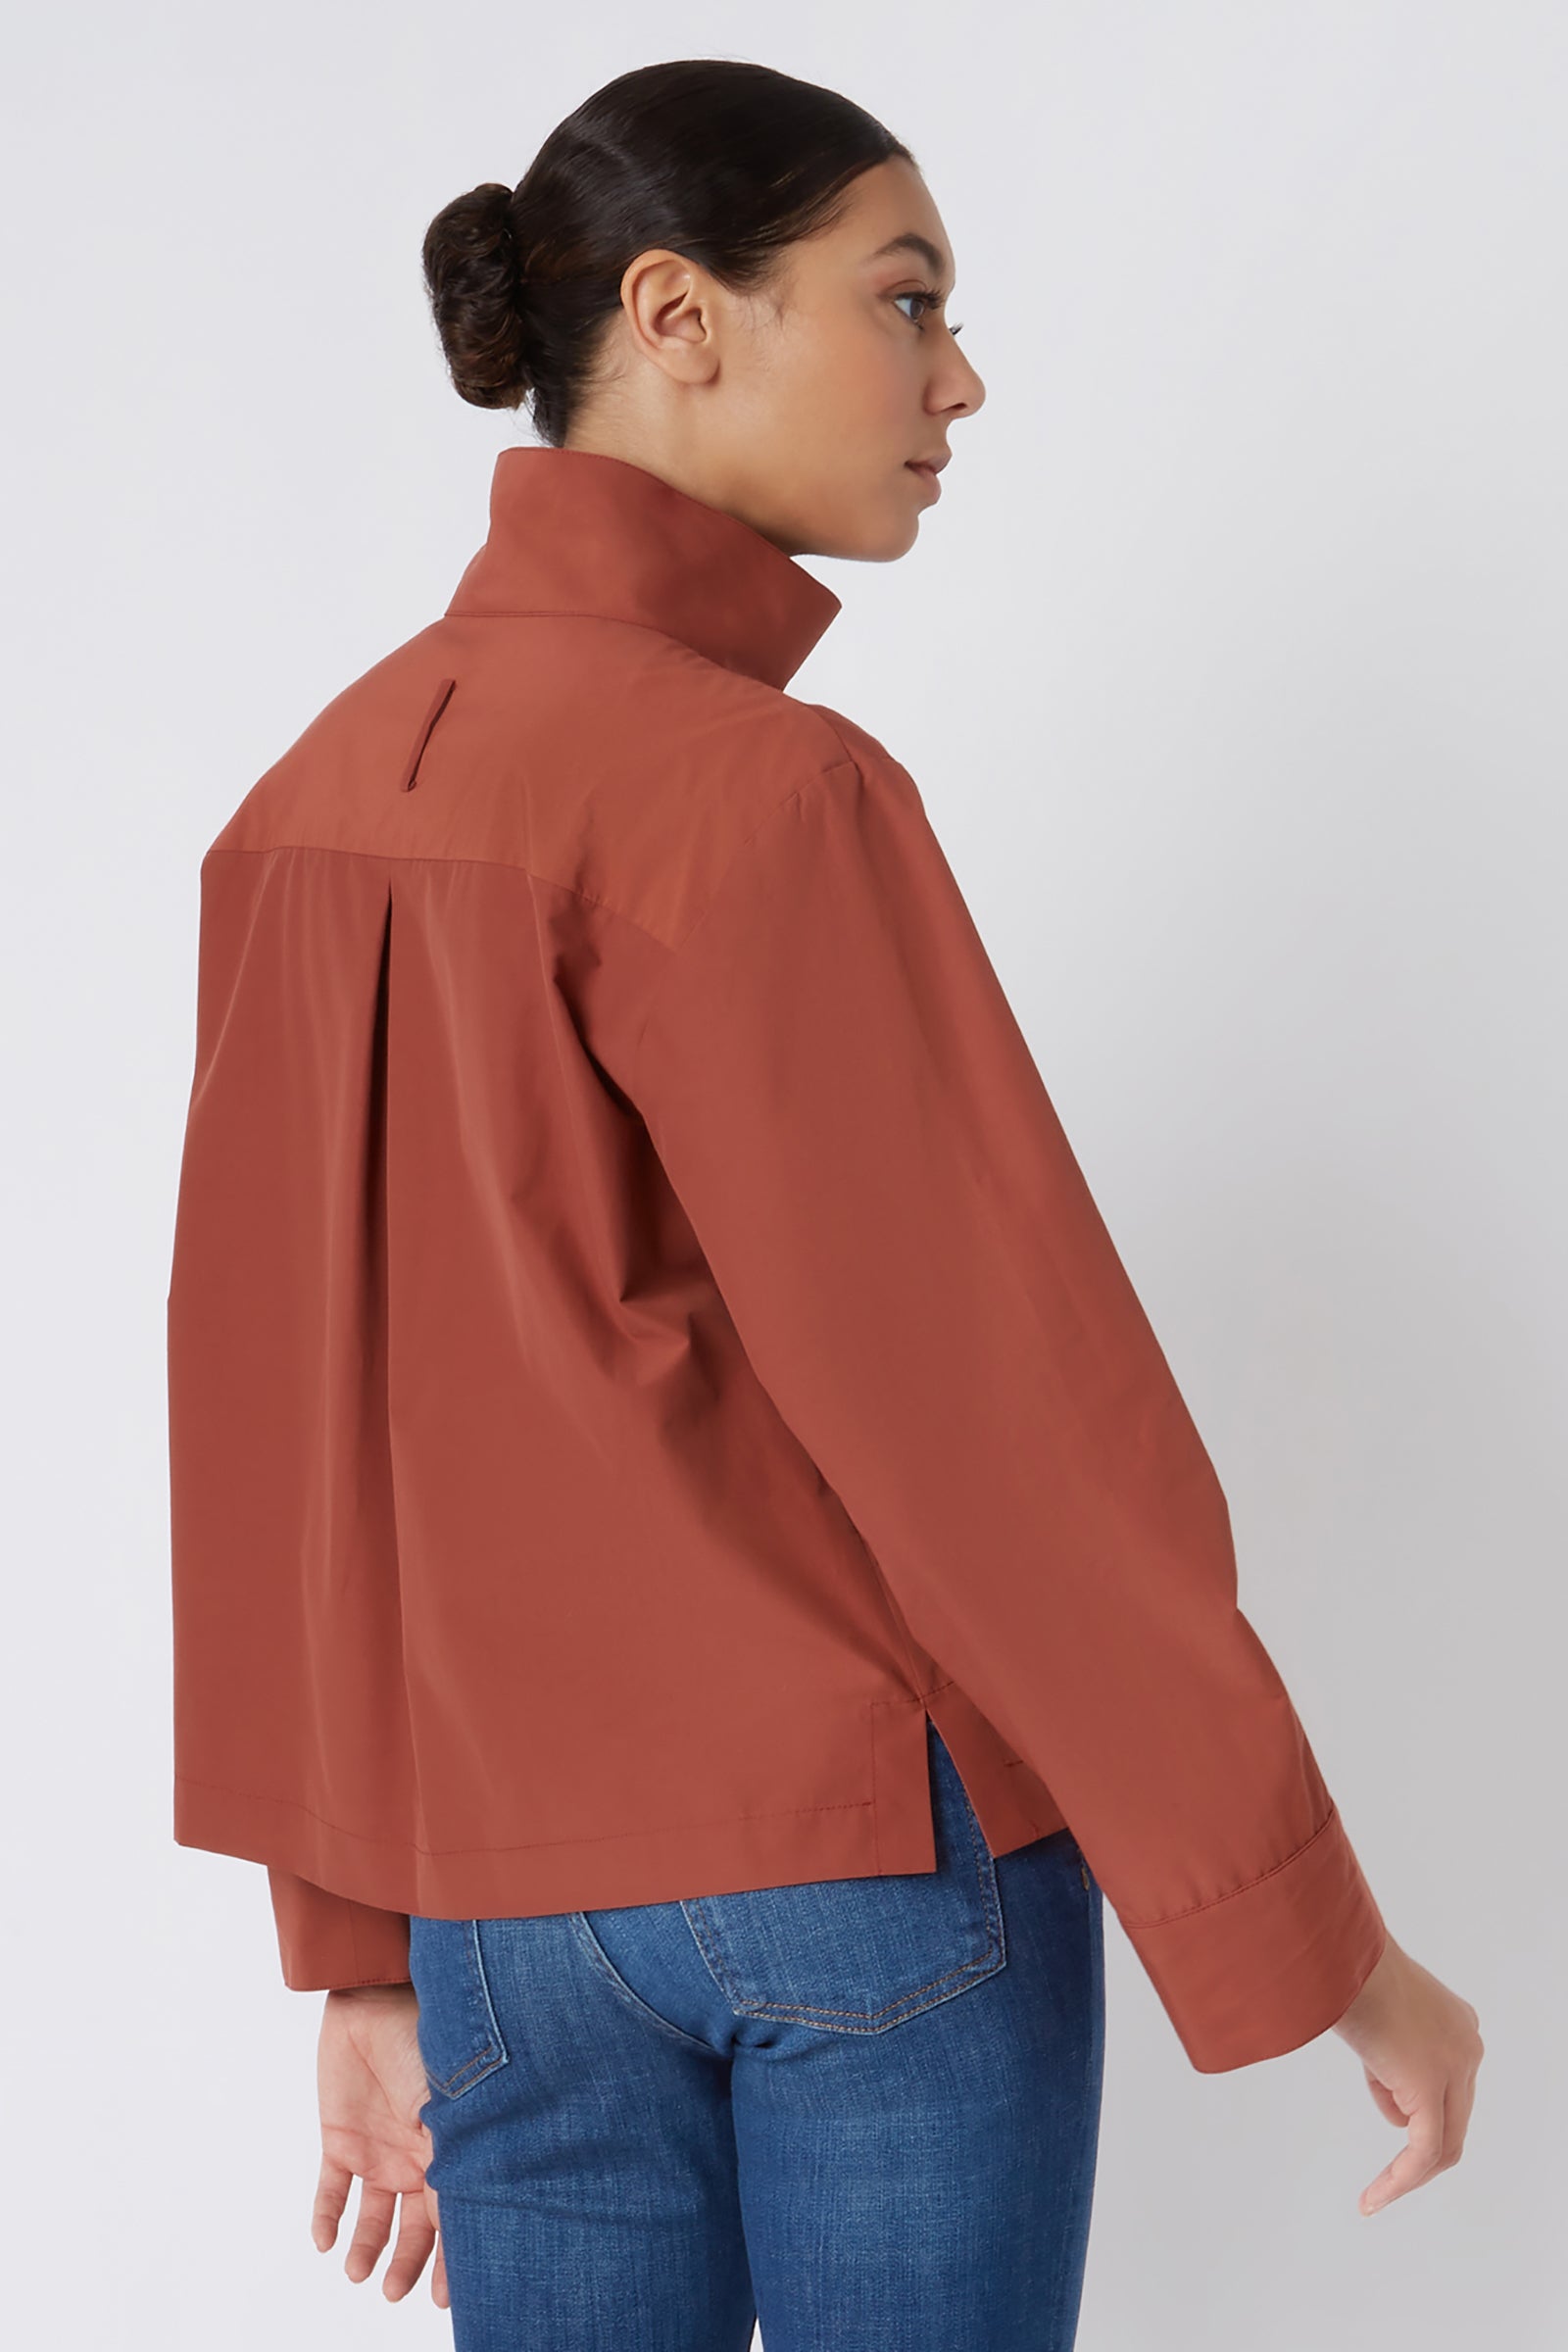 Kal Rieman Peggy Collared Shirt in Rust Broadcloth on Model Full Front View